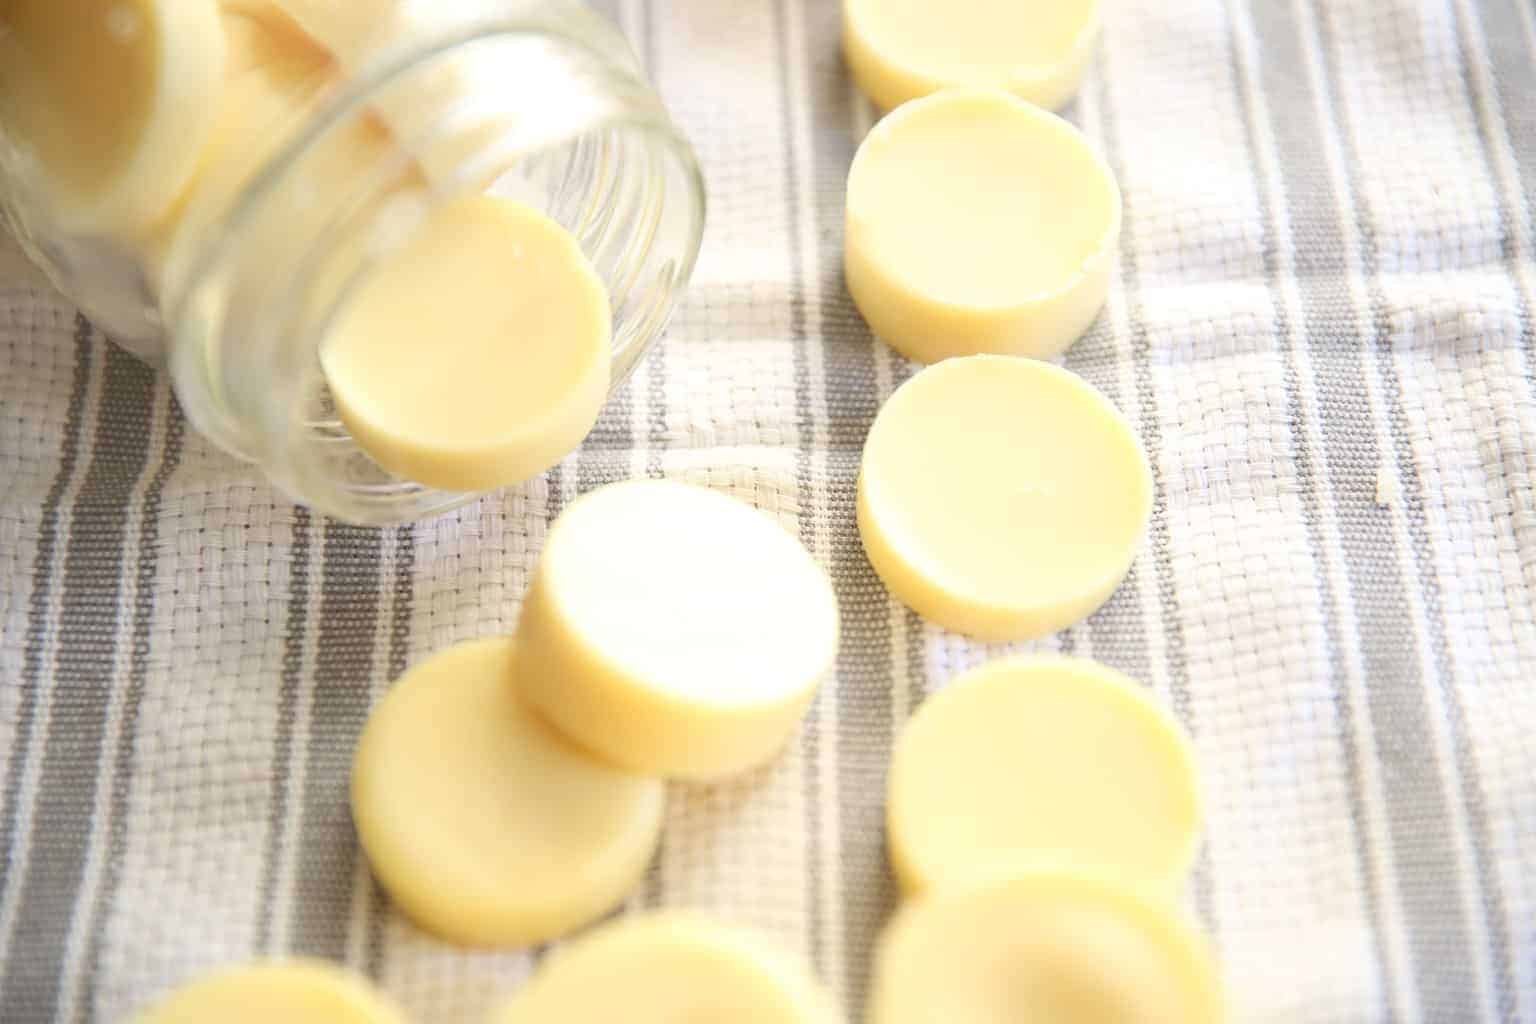 homemade lotion bars on white and gray towel in a mason jar